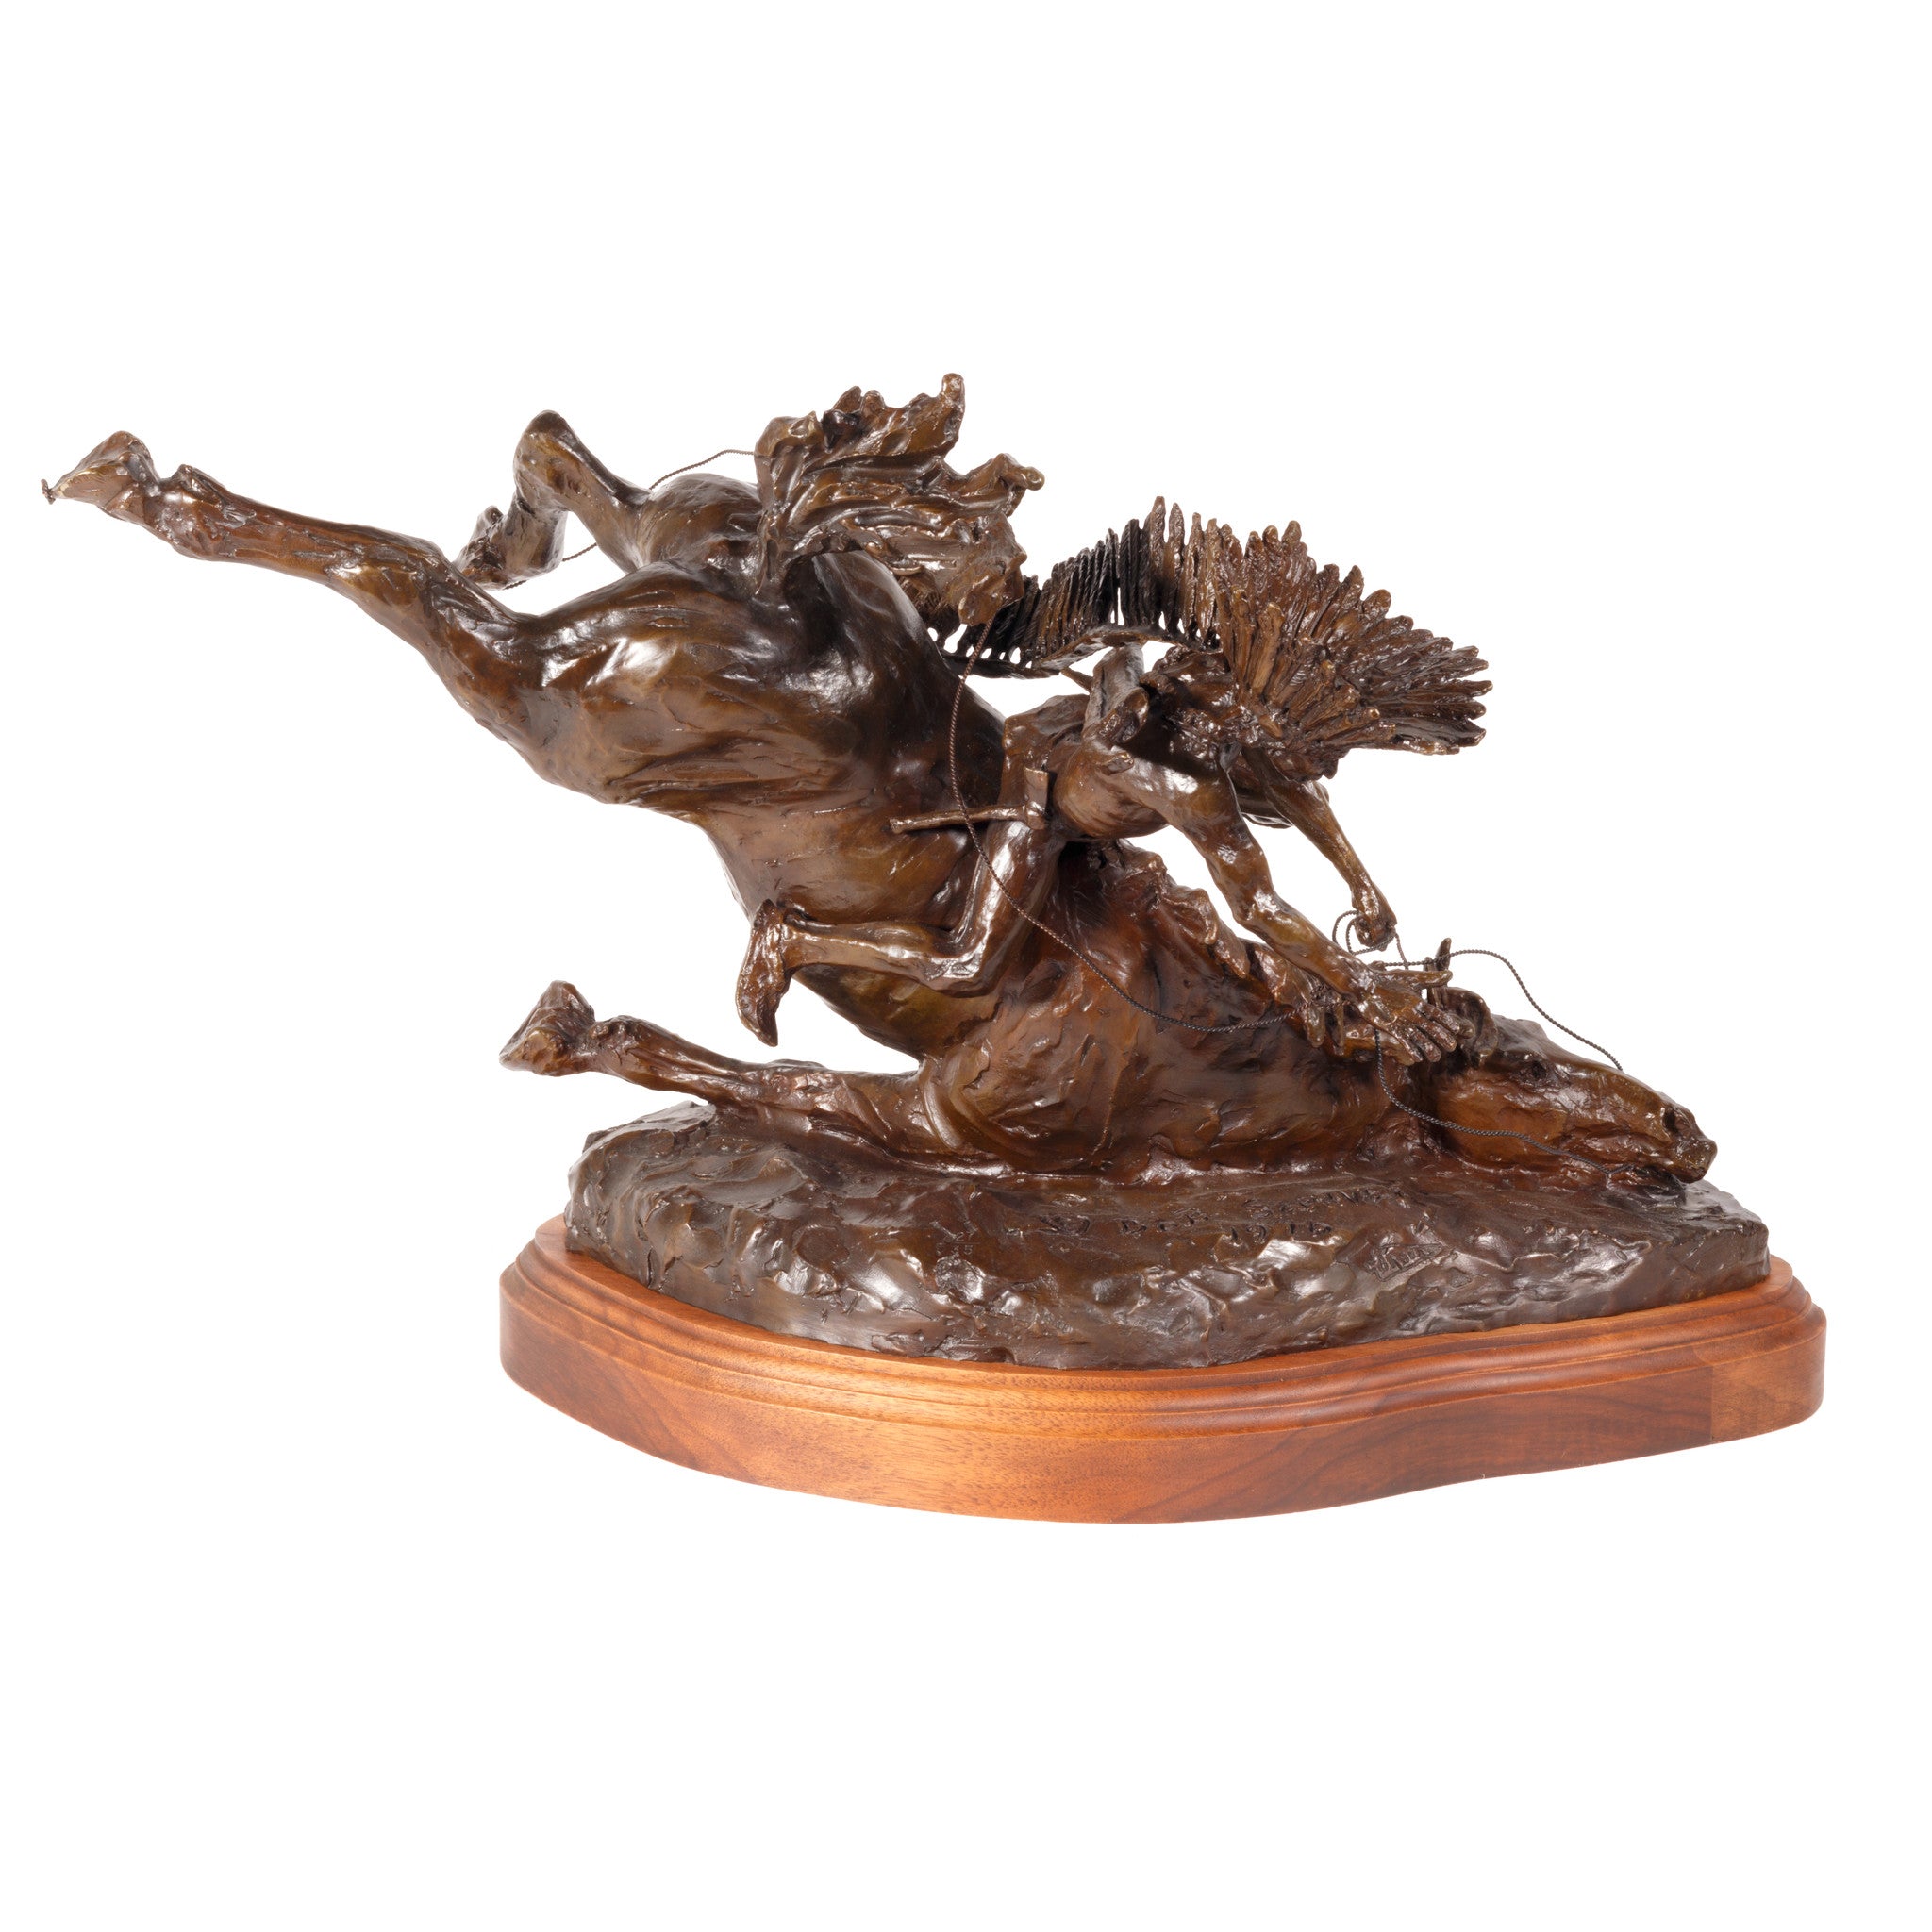 "Attack on the Wagon Train" Bronze by Robert Scriver